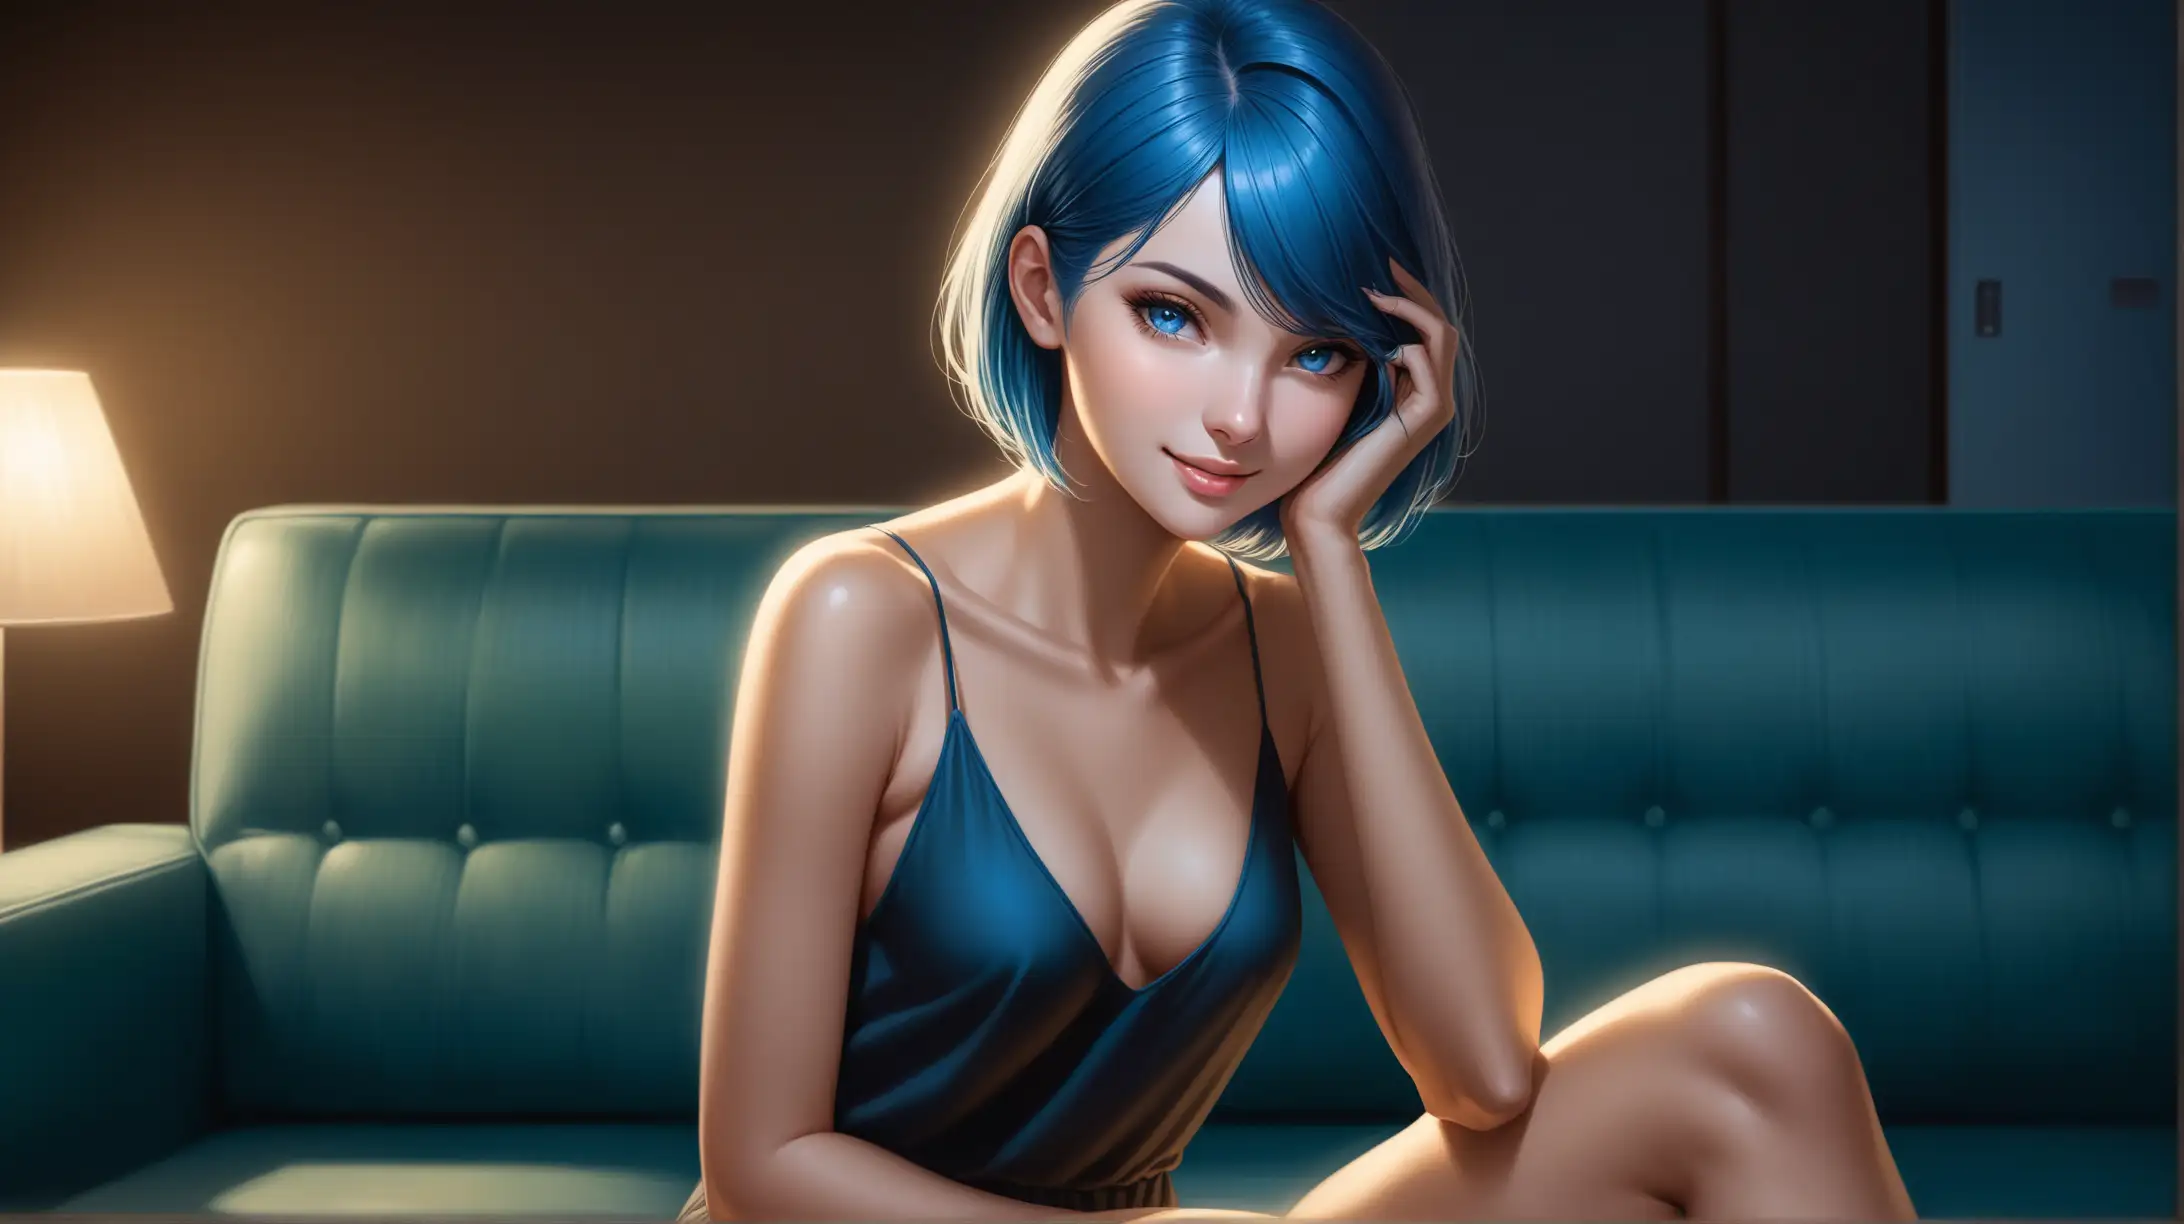 Seductive Woman with Short Blue Hair Relaxing on Sofa at Night